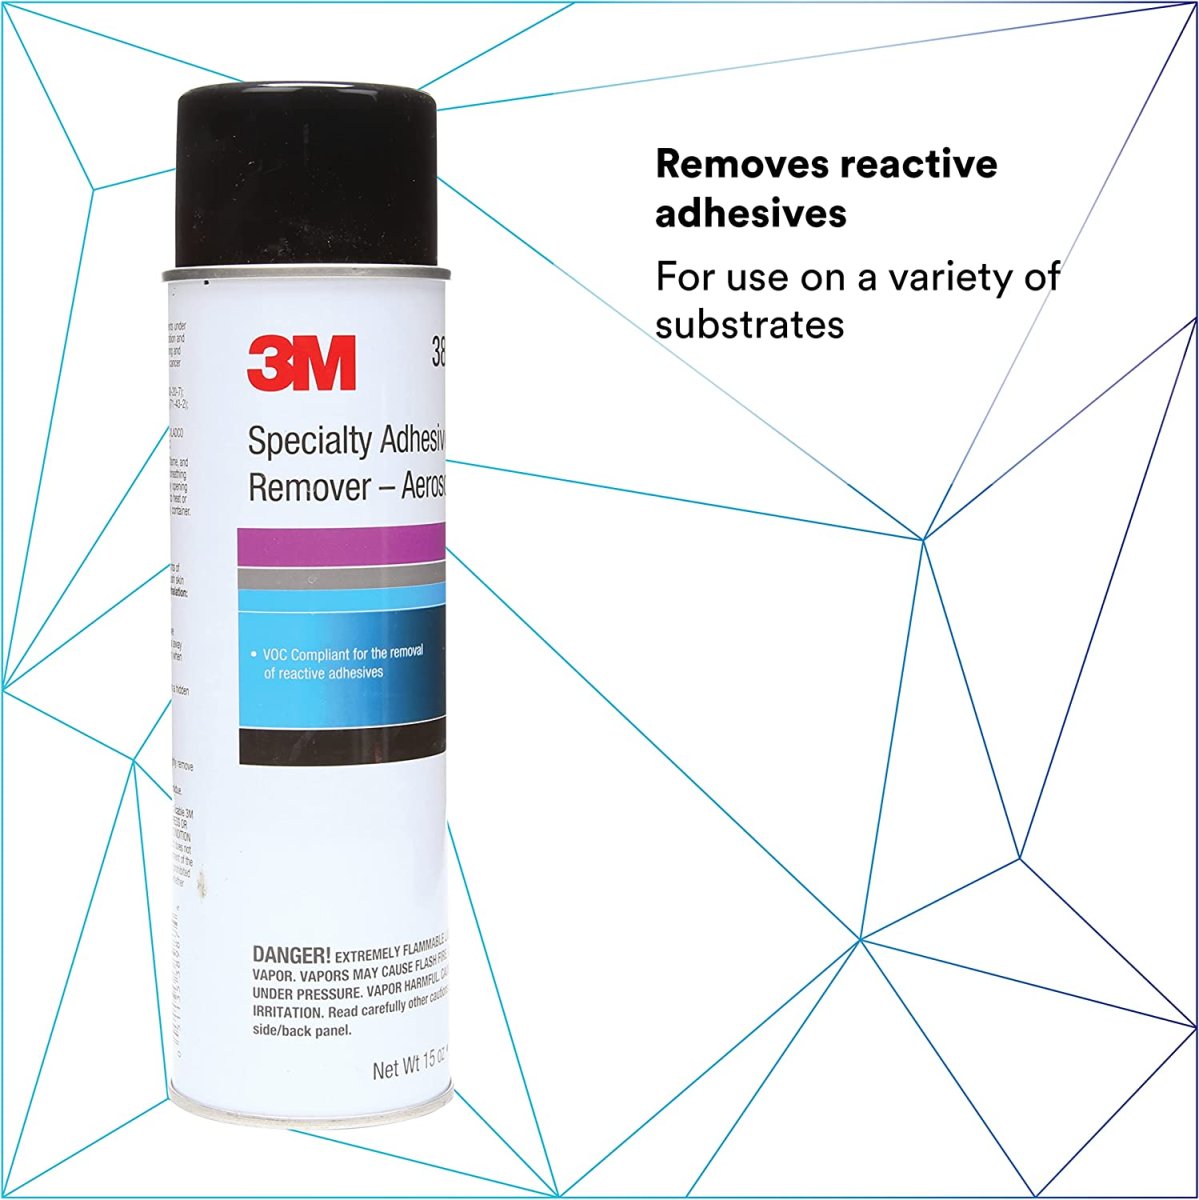 3M 38987 Specialty Adhesive Remover, 15 ounce